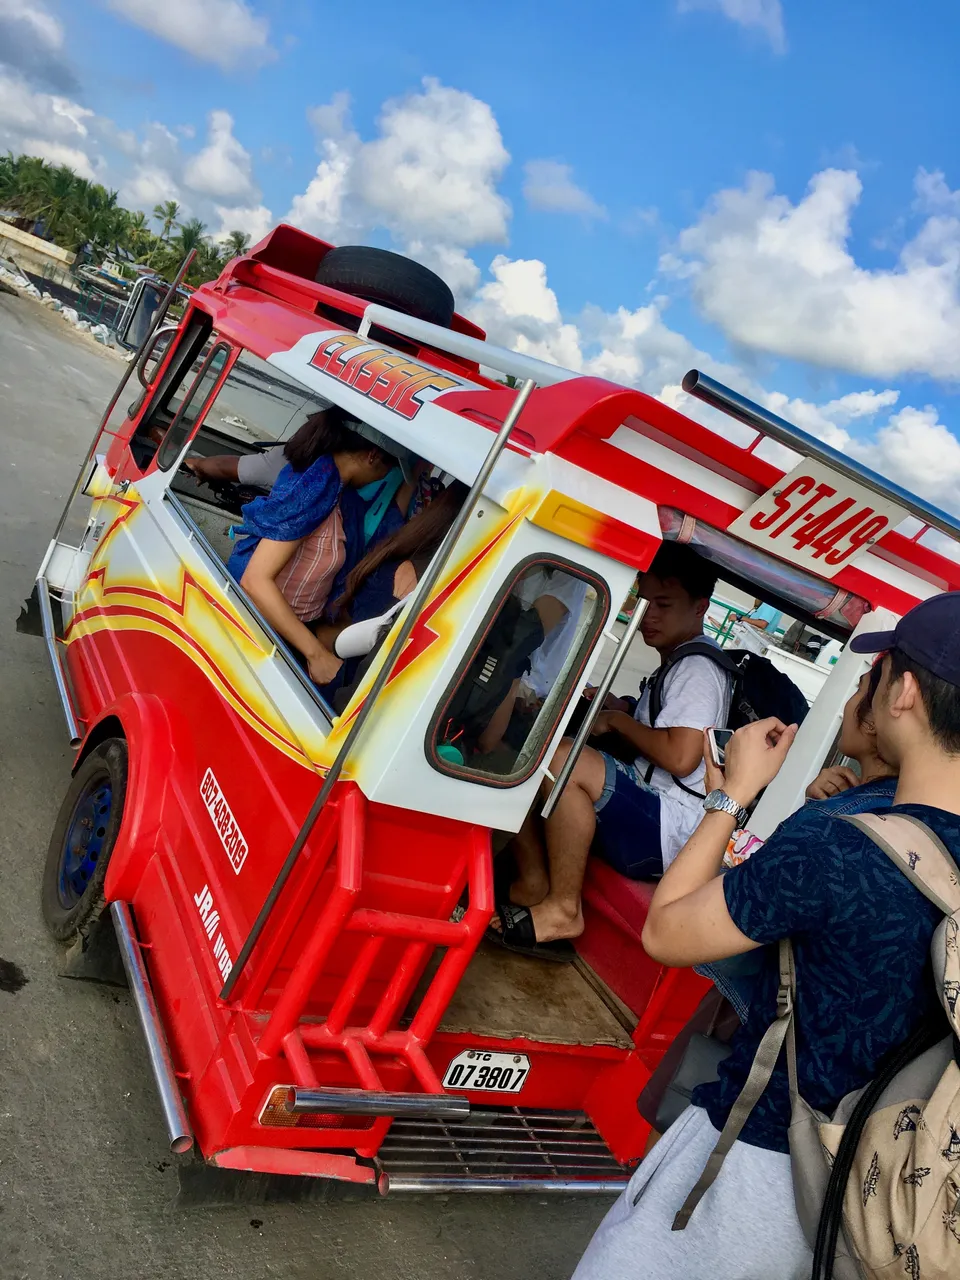 A tricycle fashioned to look like a jeepney was our means of transportation to our homestay